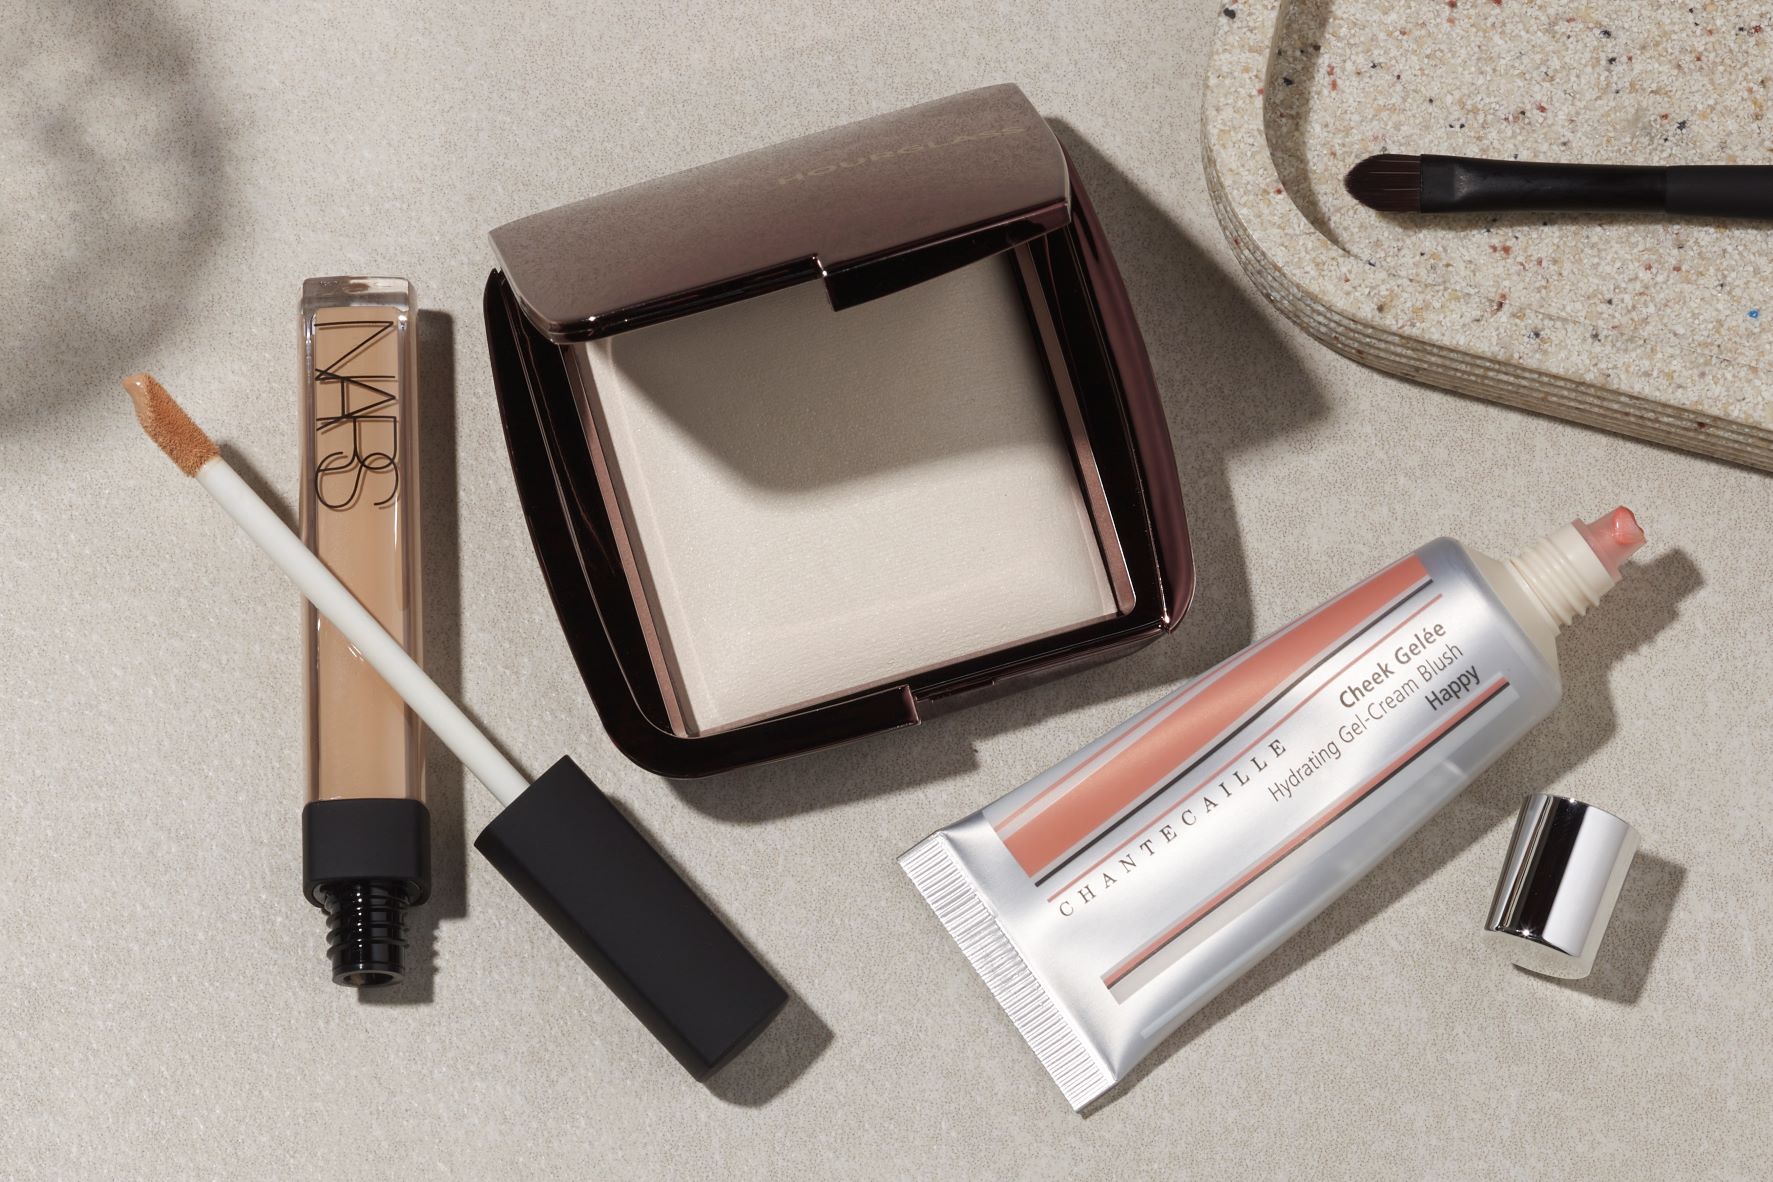 Guide To The Minimal Makeup Look | Space NK